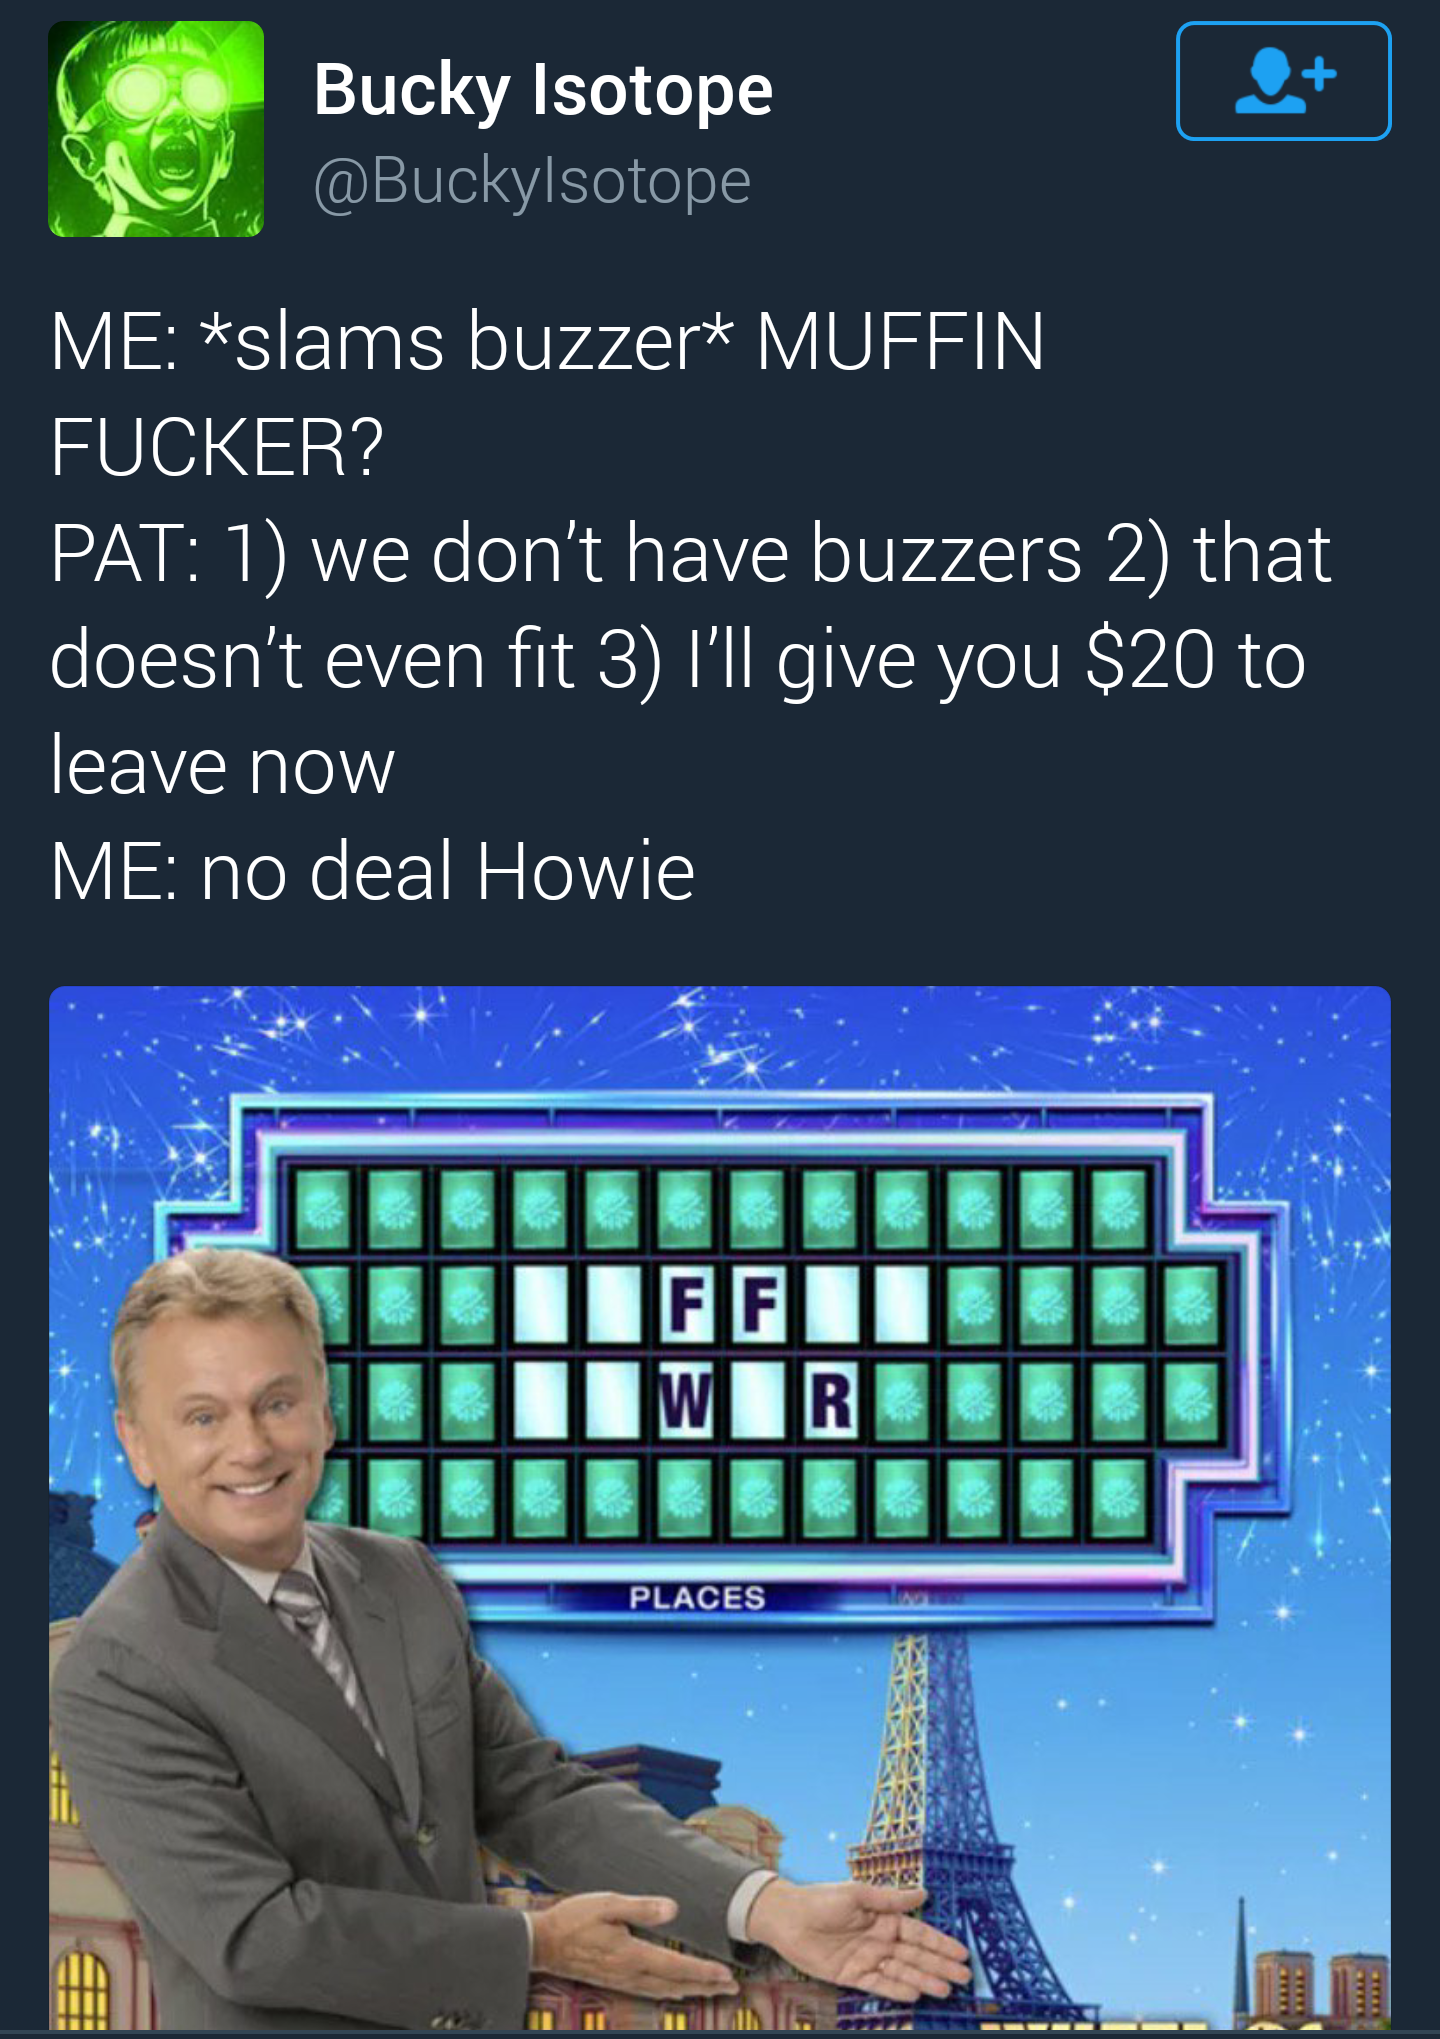 muffin fucker meme - Bucky Isotope Me slams buzzer Muffin Fucker? Pat 1 we don't have buzzers 2 that doesn't even fit 3 I'll give you $20 to leave now Me no deal Howie Freel Wir Be Places